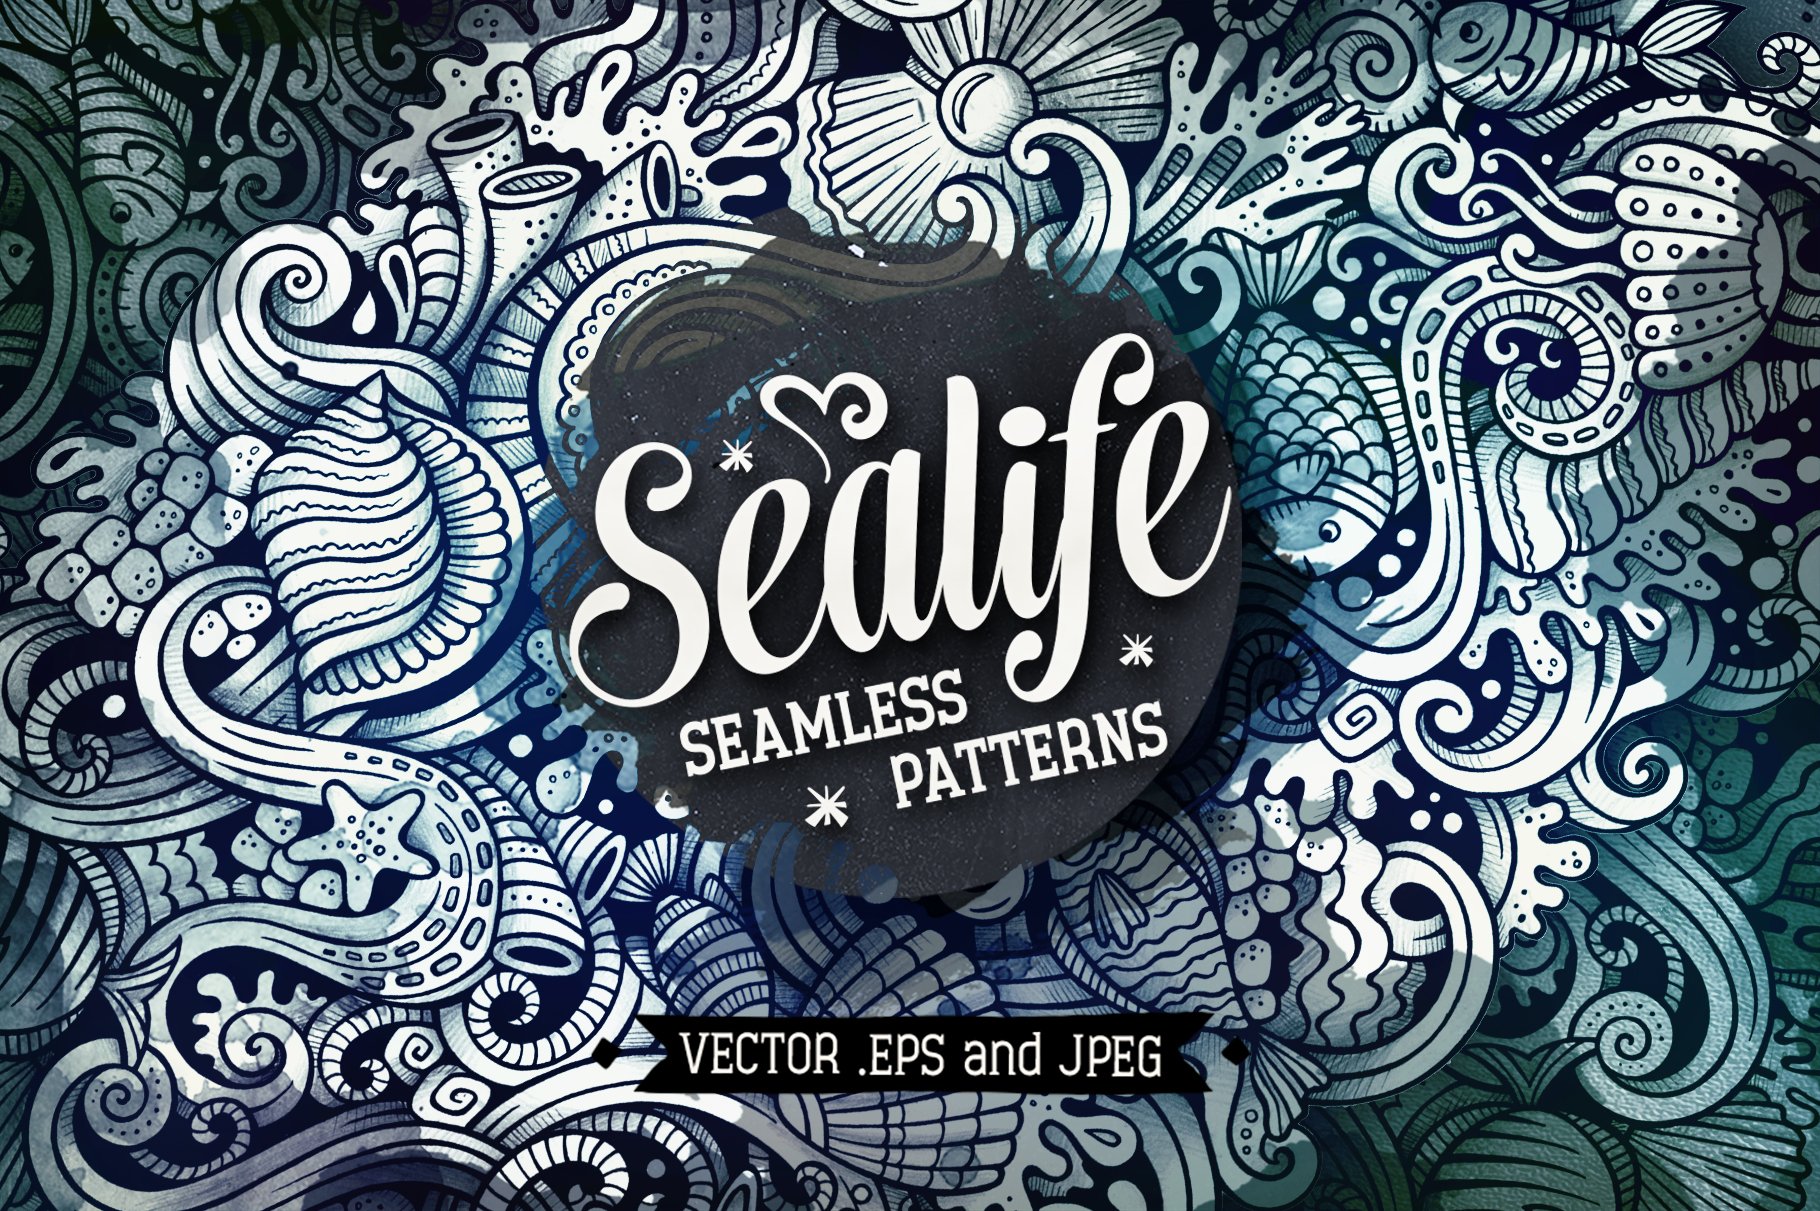 Underwater Graphics Patterns cover image.